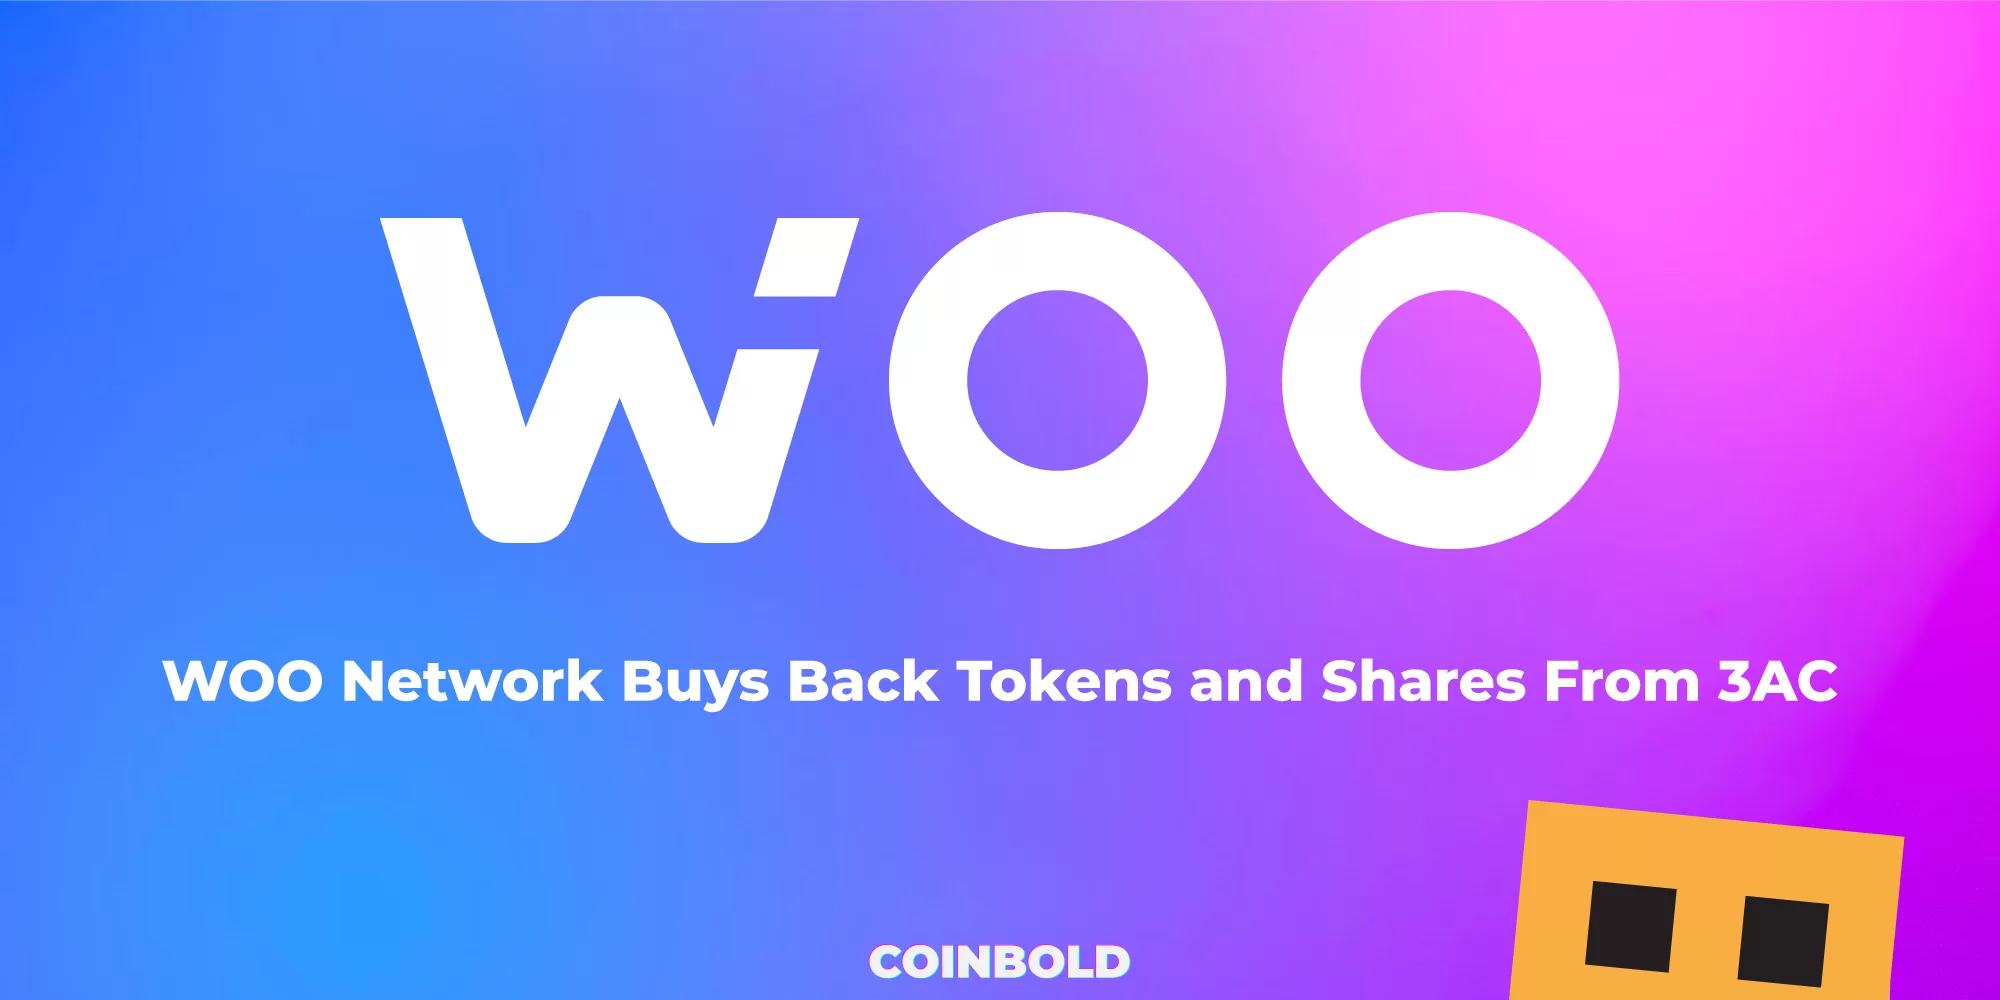 WOO Network Buys Back Tokens and Shares From 3AC